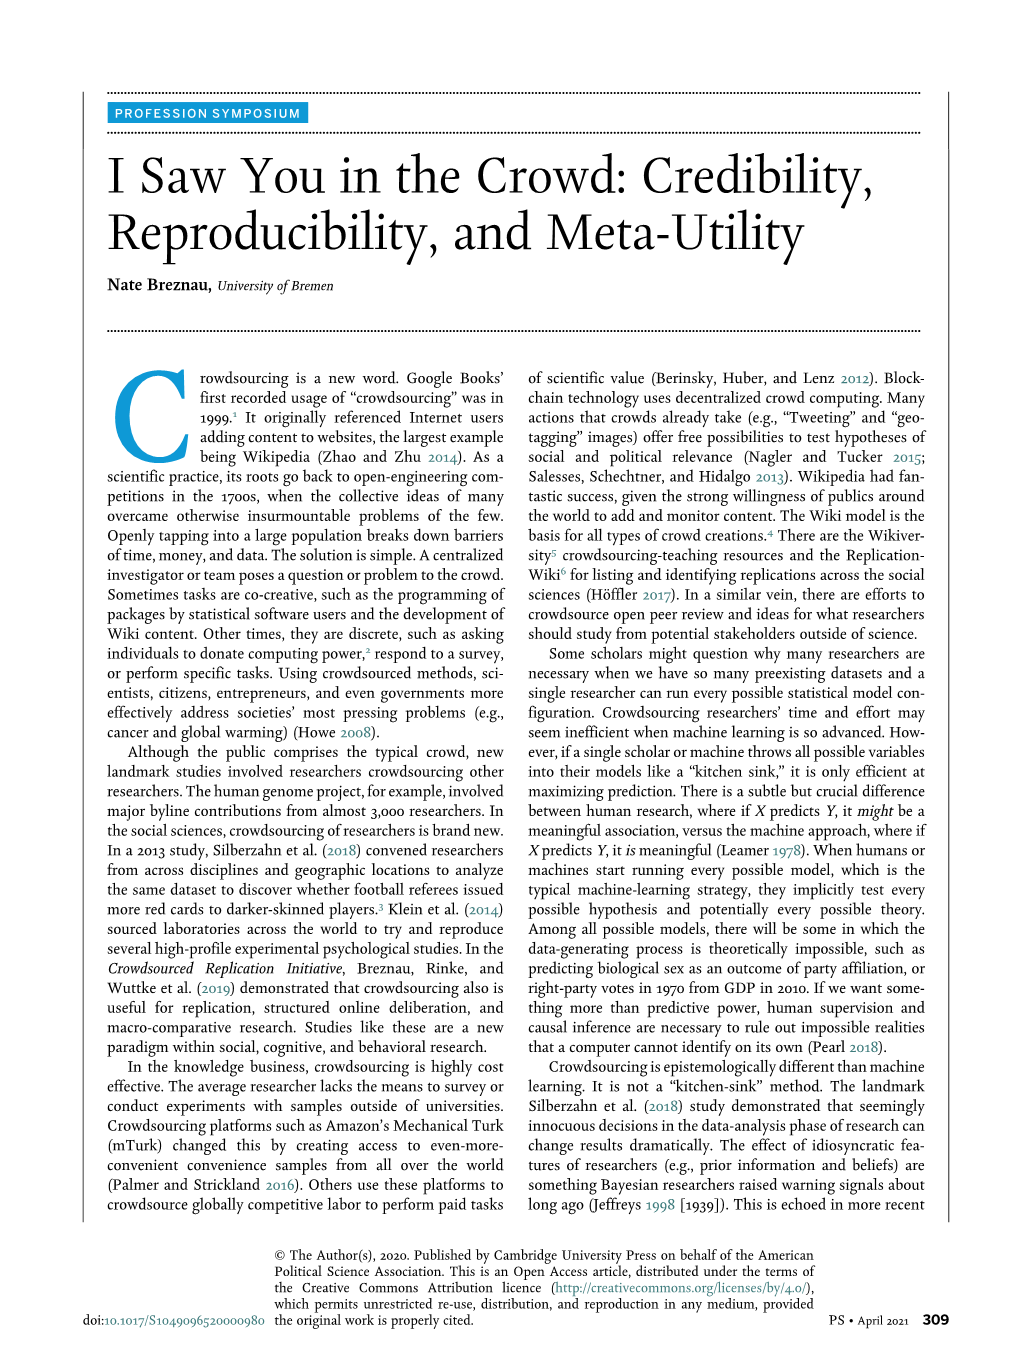 I Saw You in the Crowd: Credibility, Reproducibility, and Meta-Utility